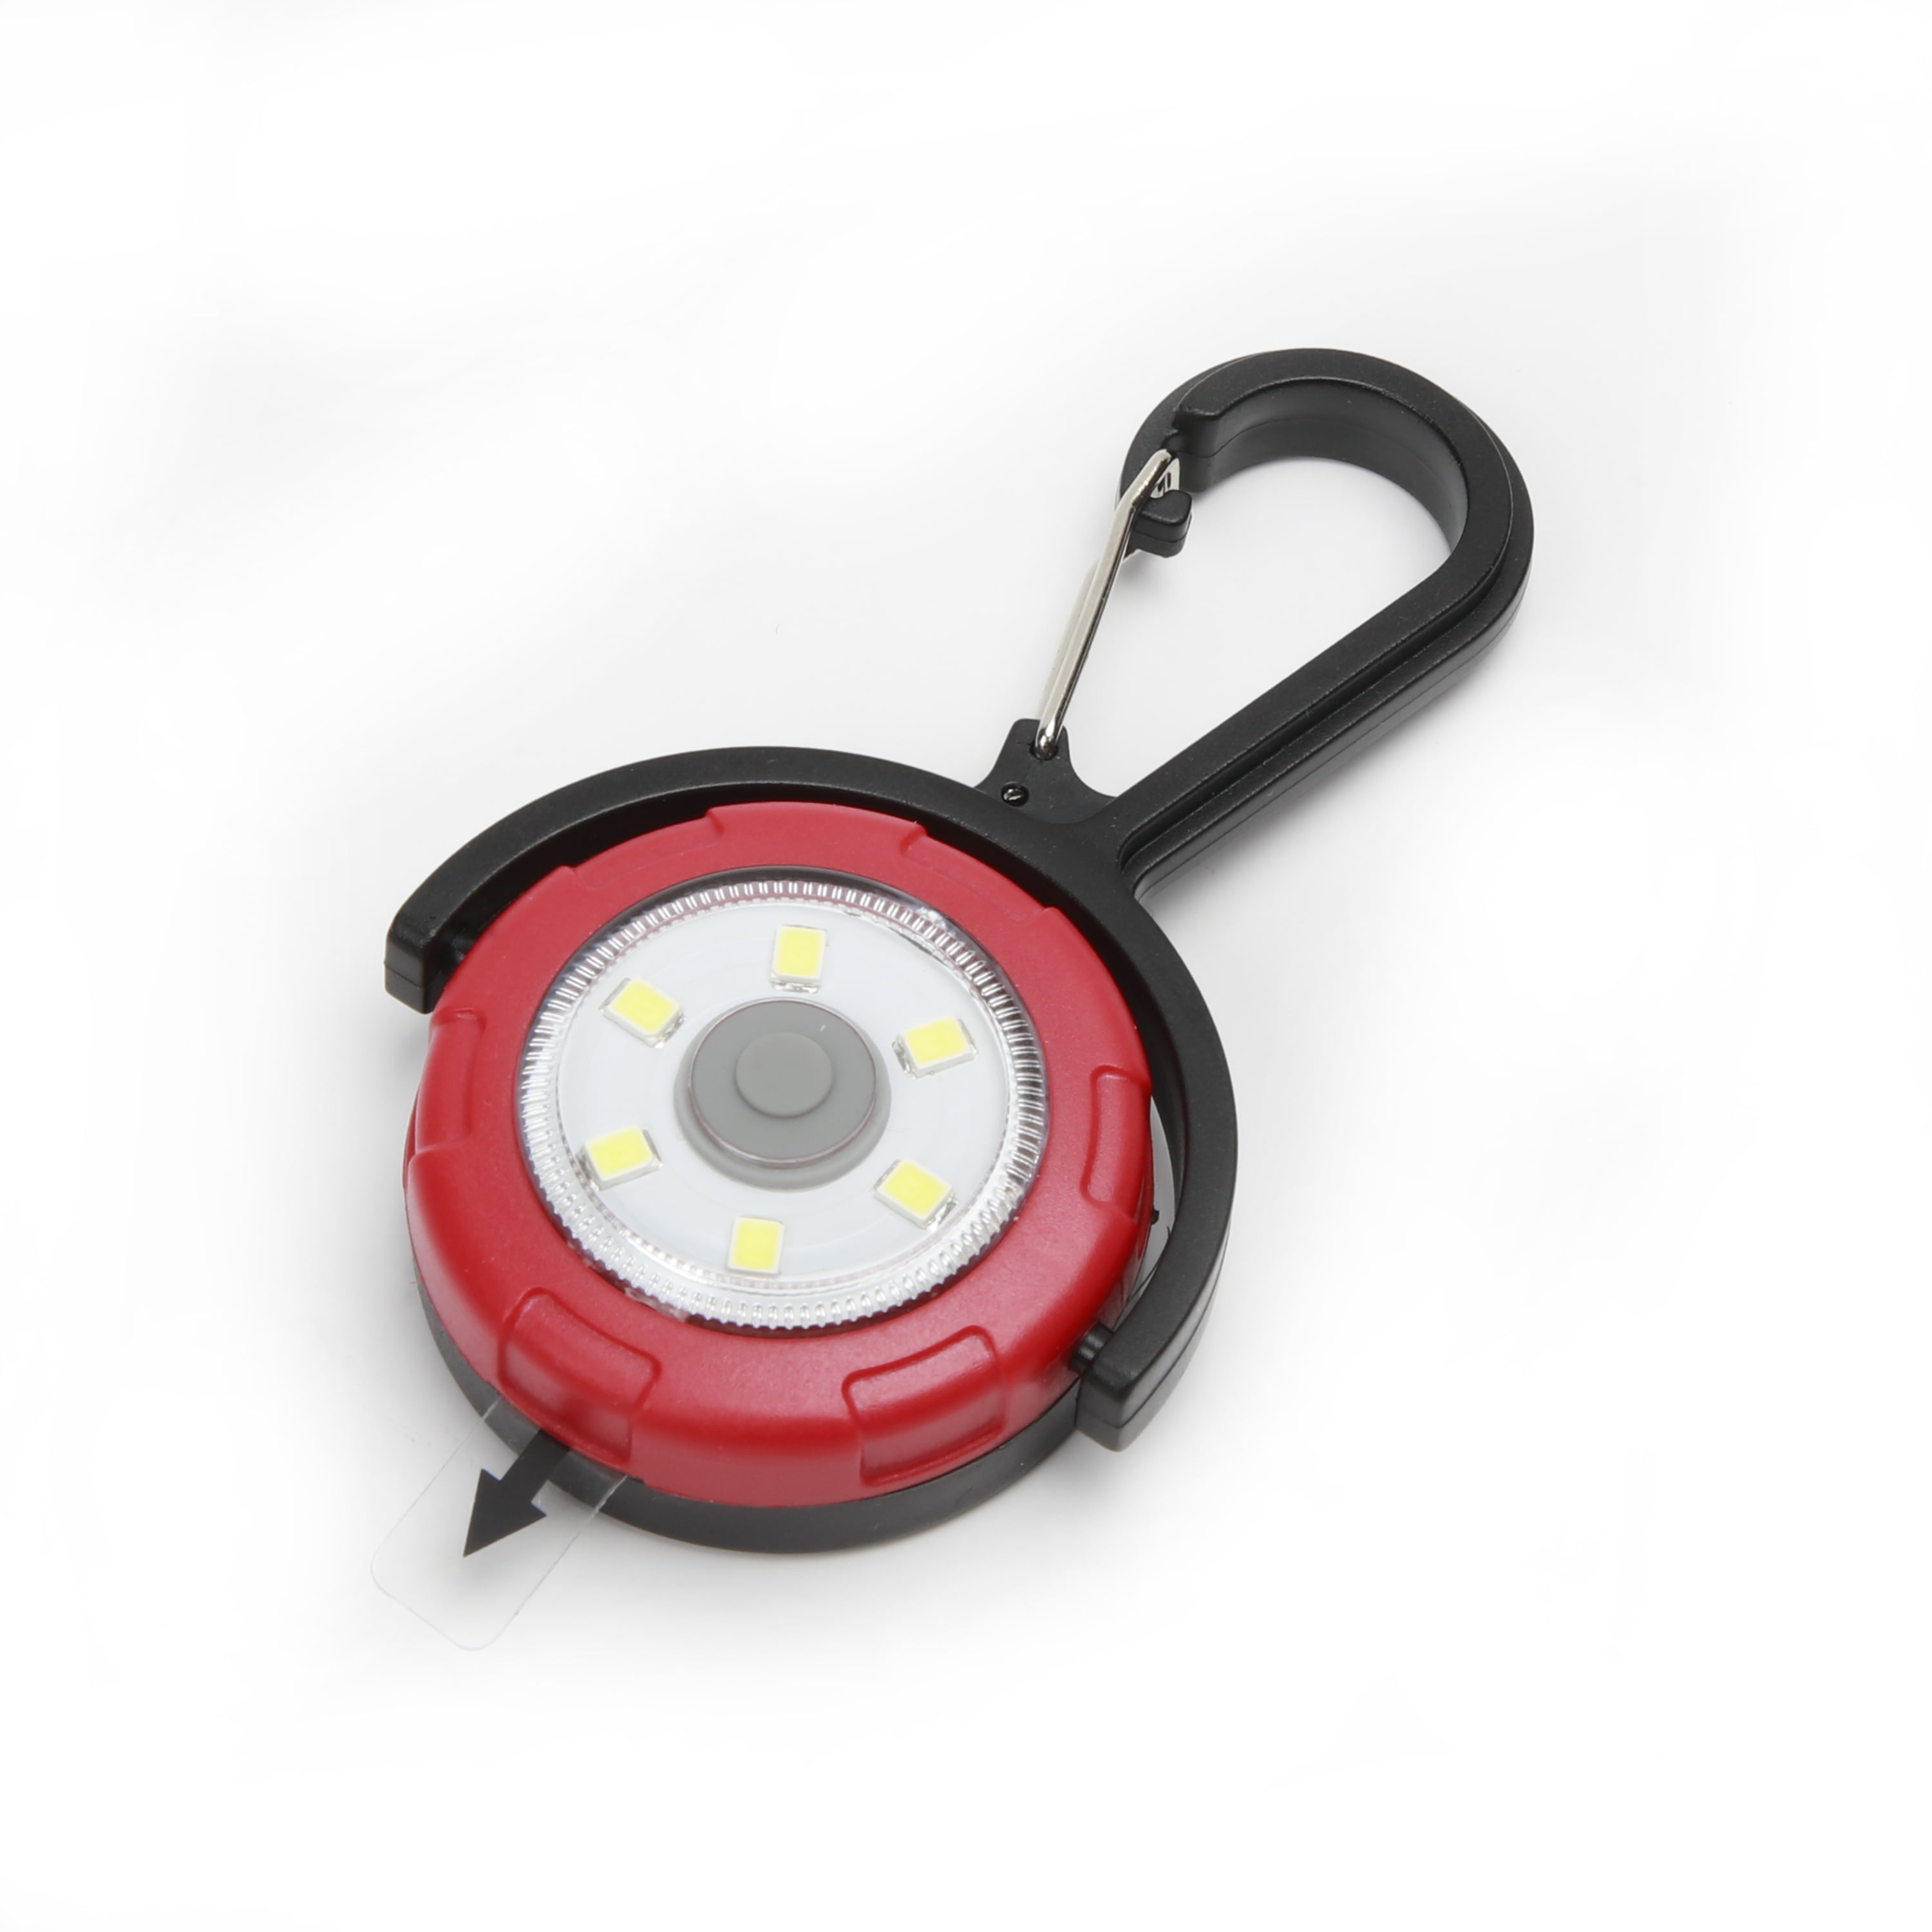 Hyper Tough LED Portable Keychain Light, Fits All, Black,Red,